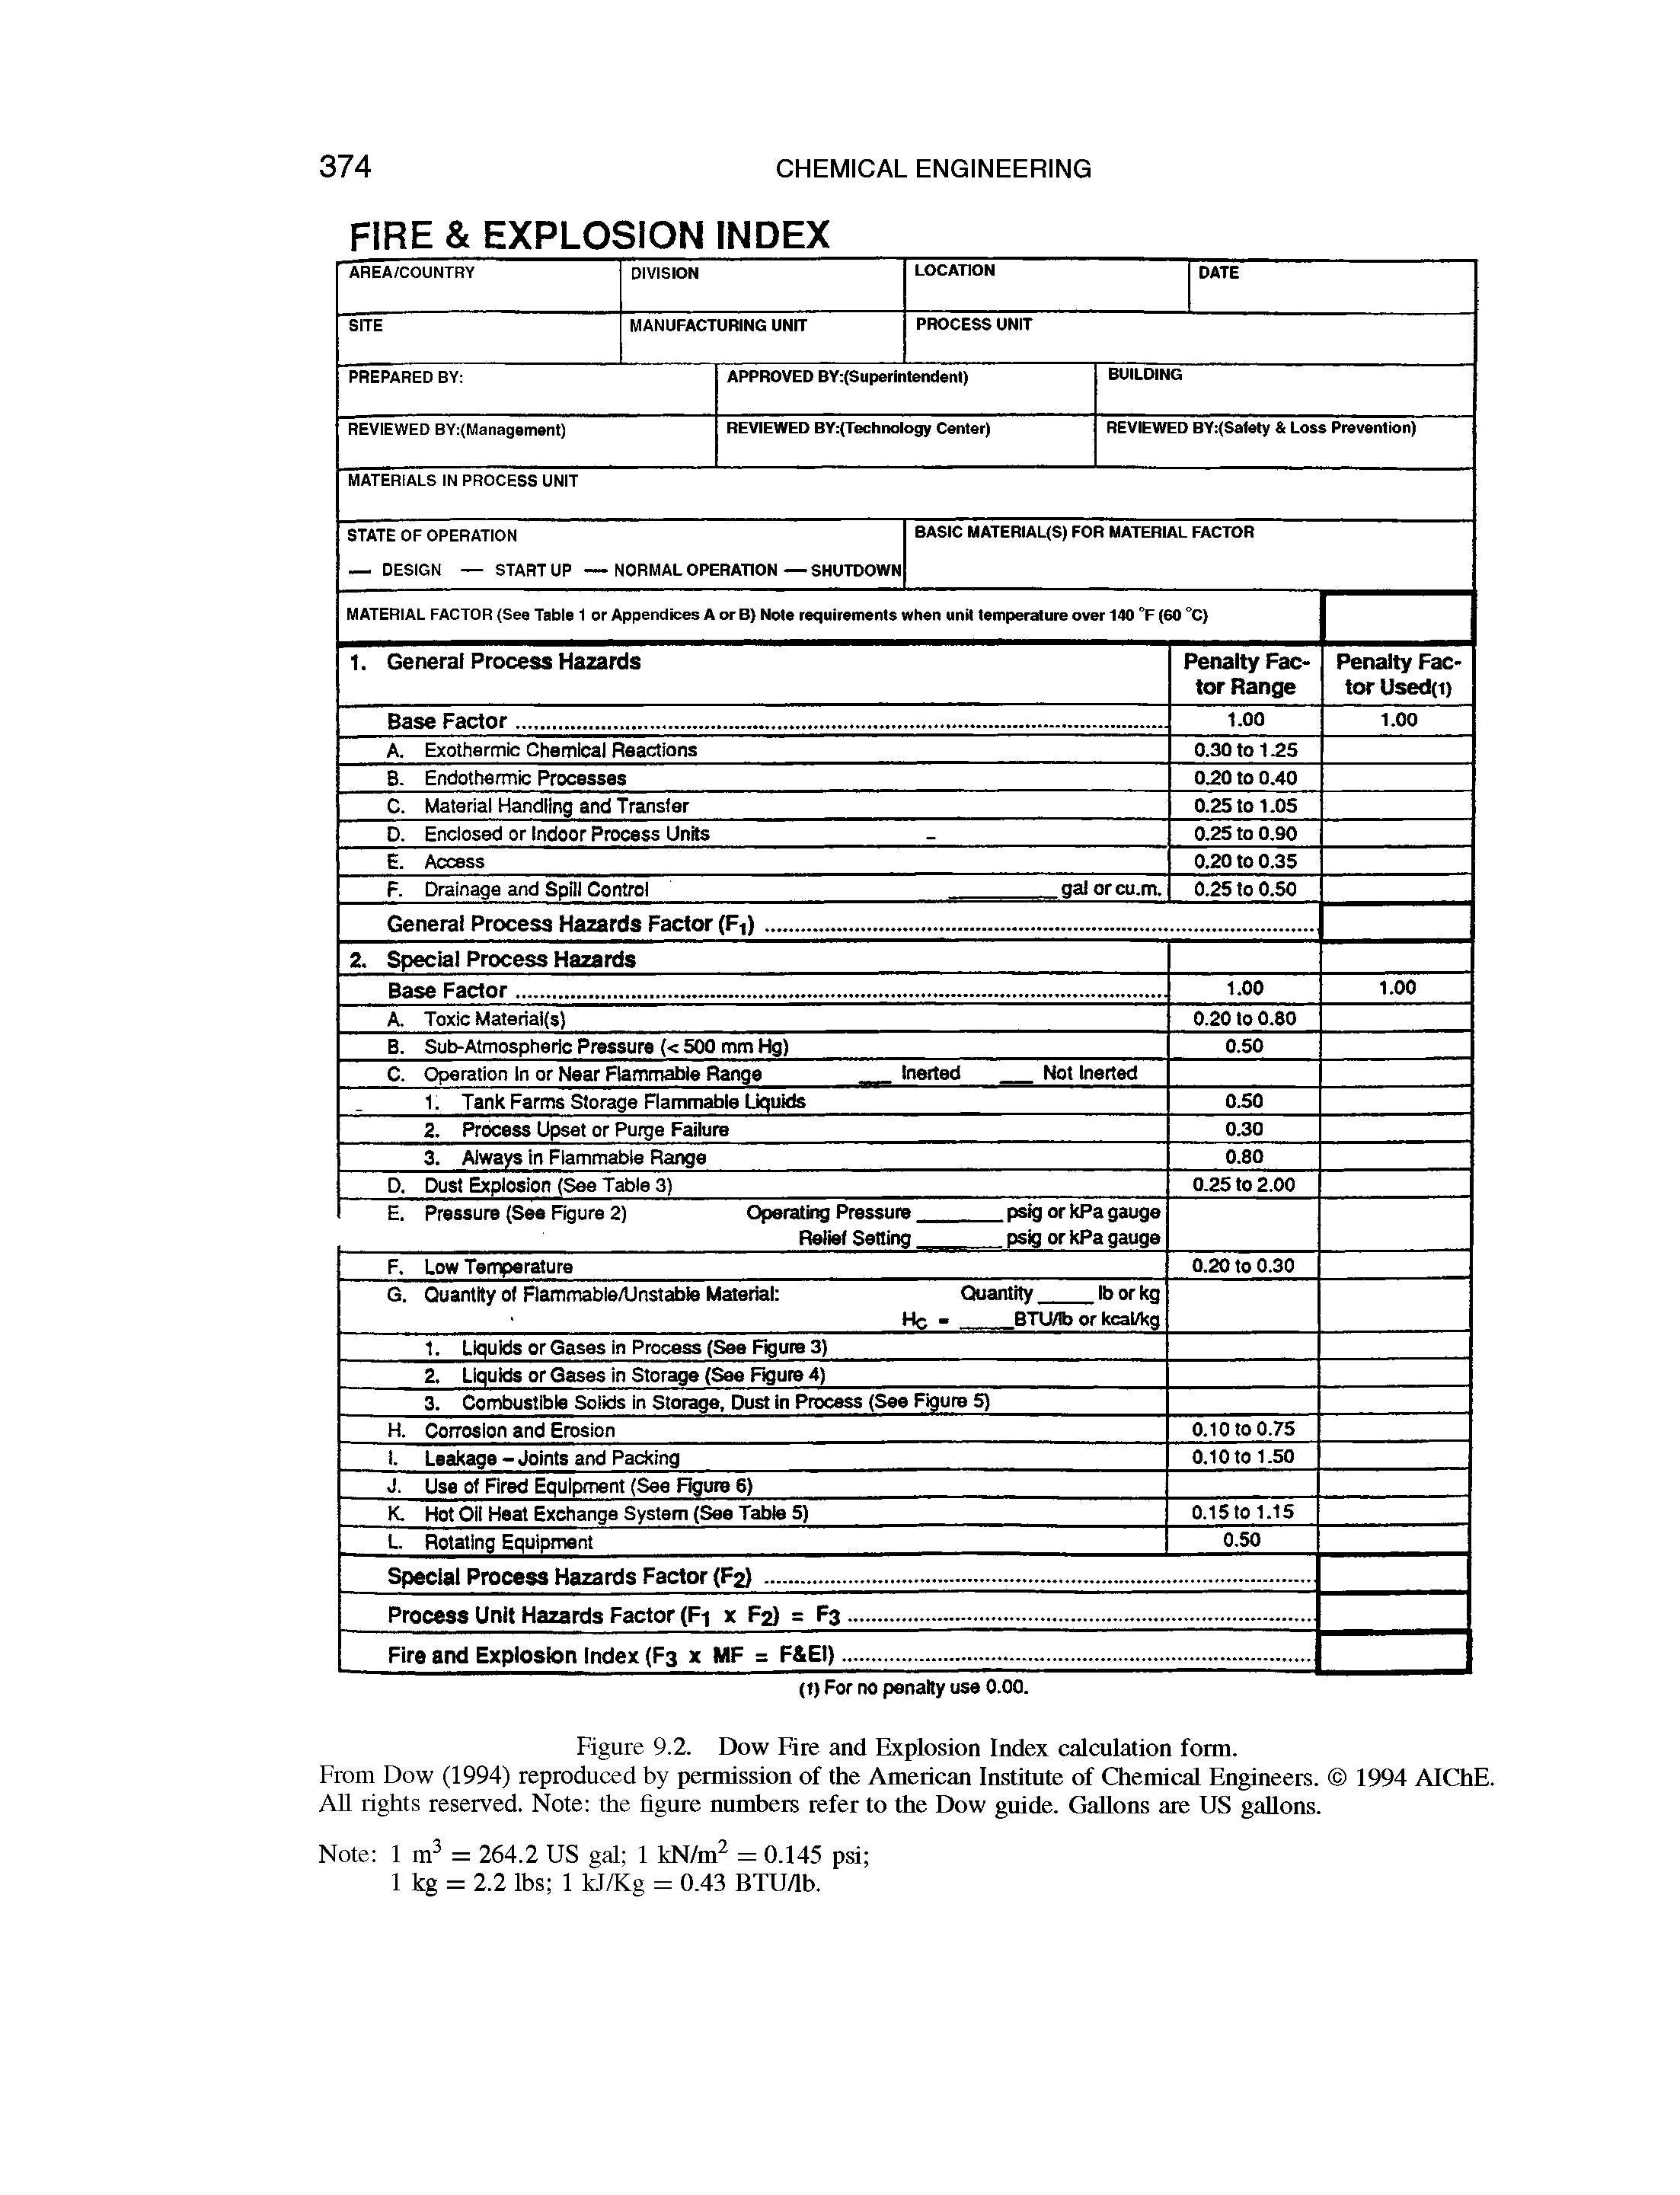 Figure 9.2. Dow Fire and Explosion Index calculation form.